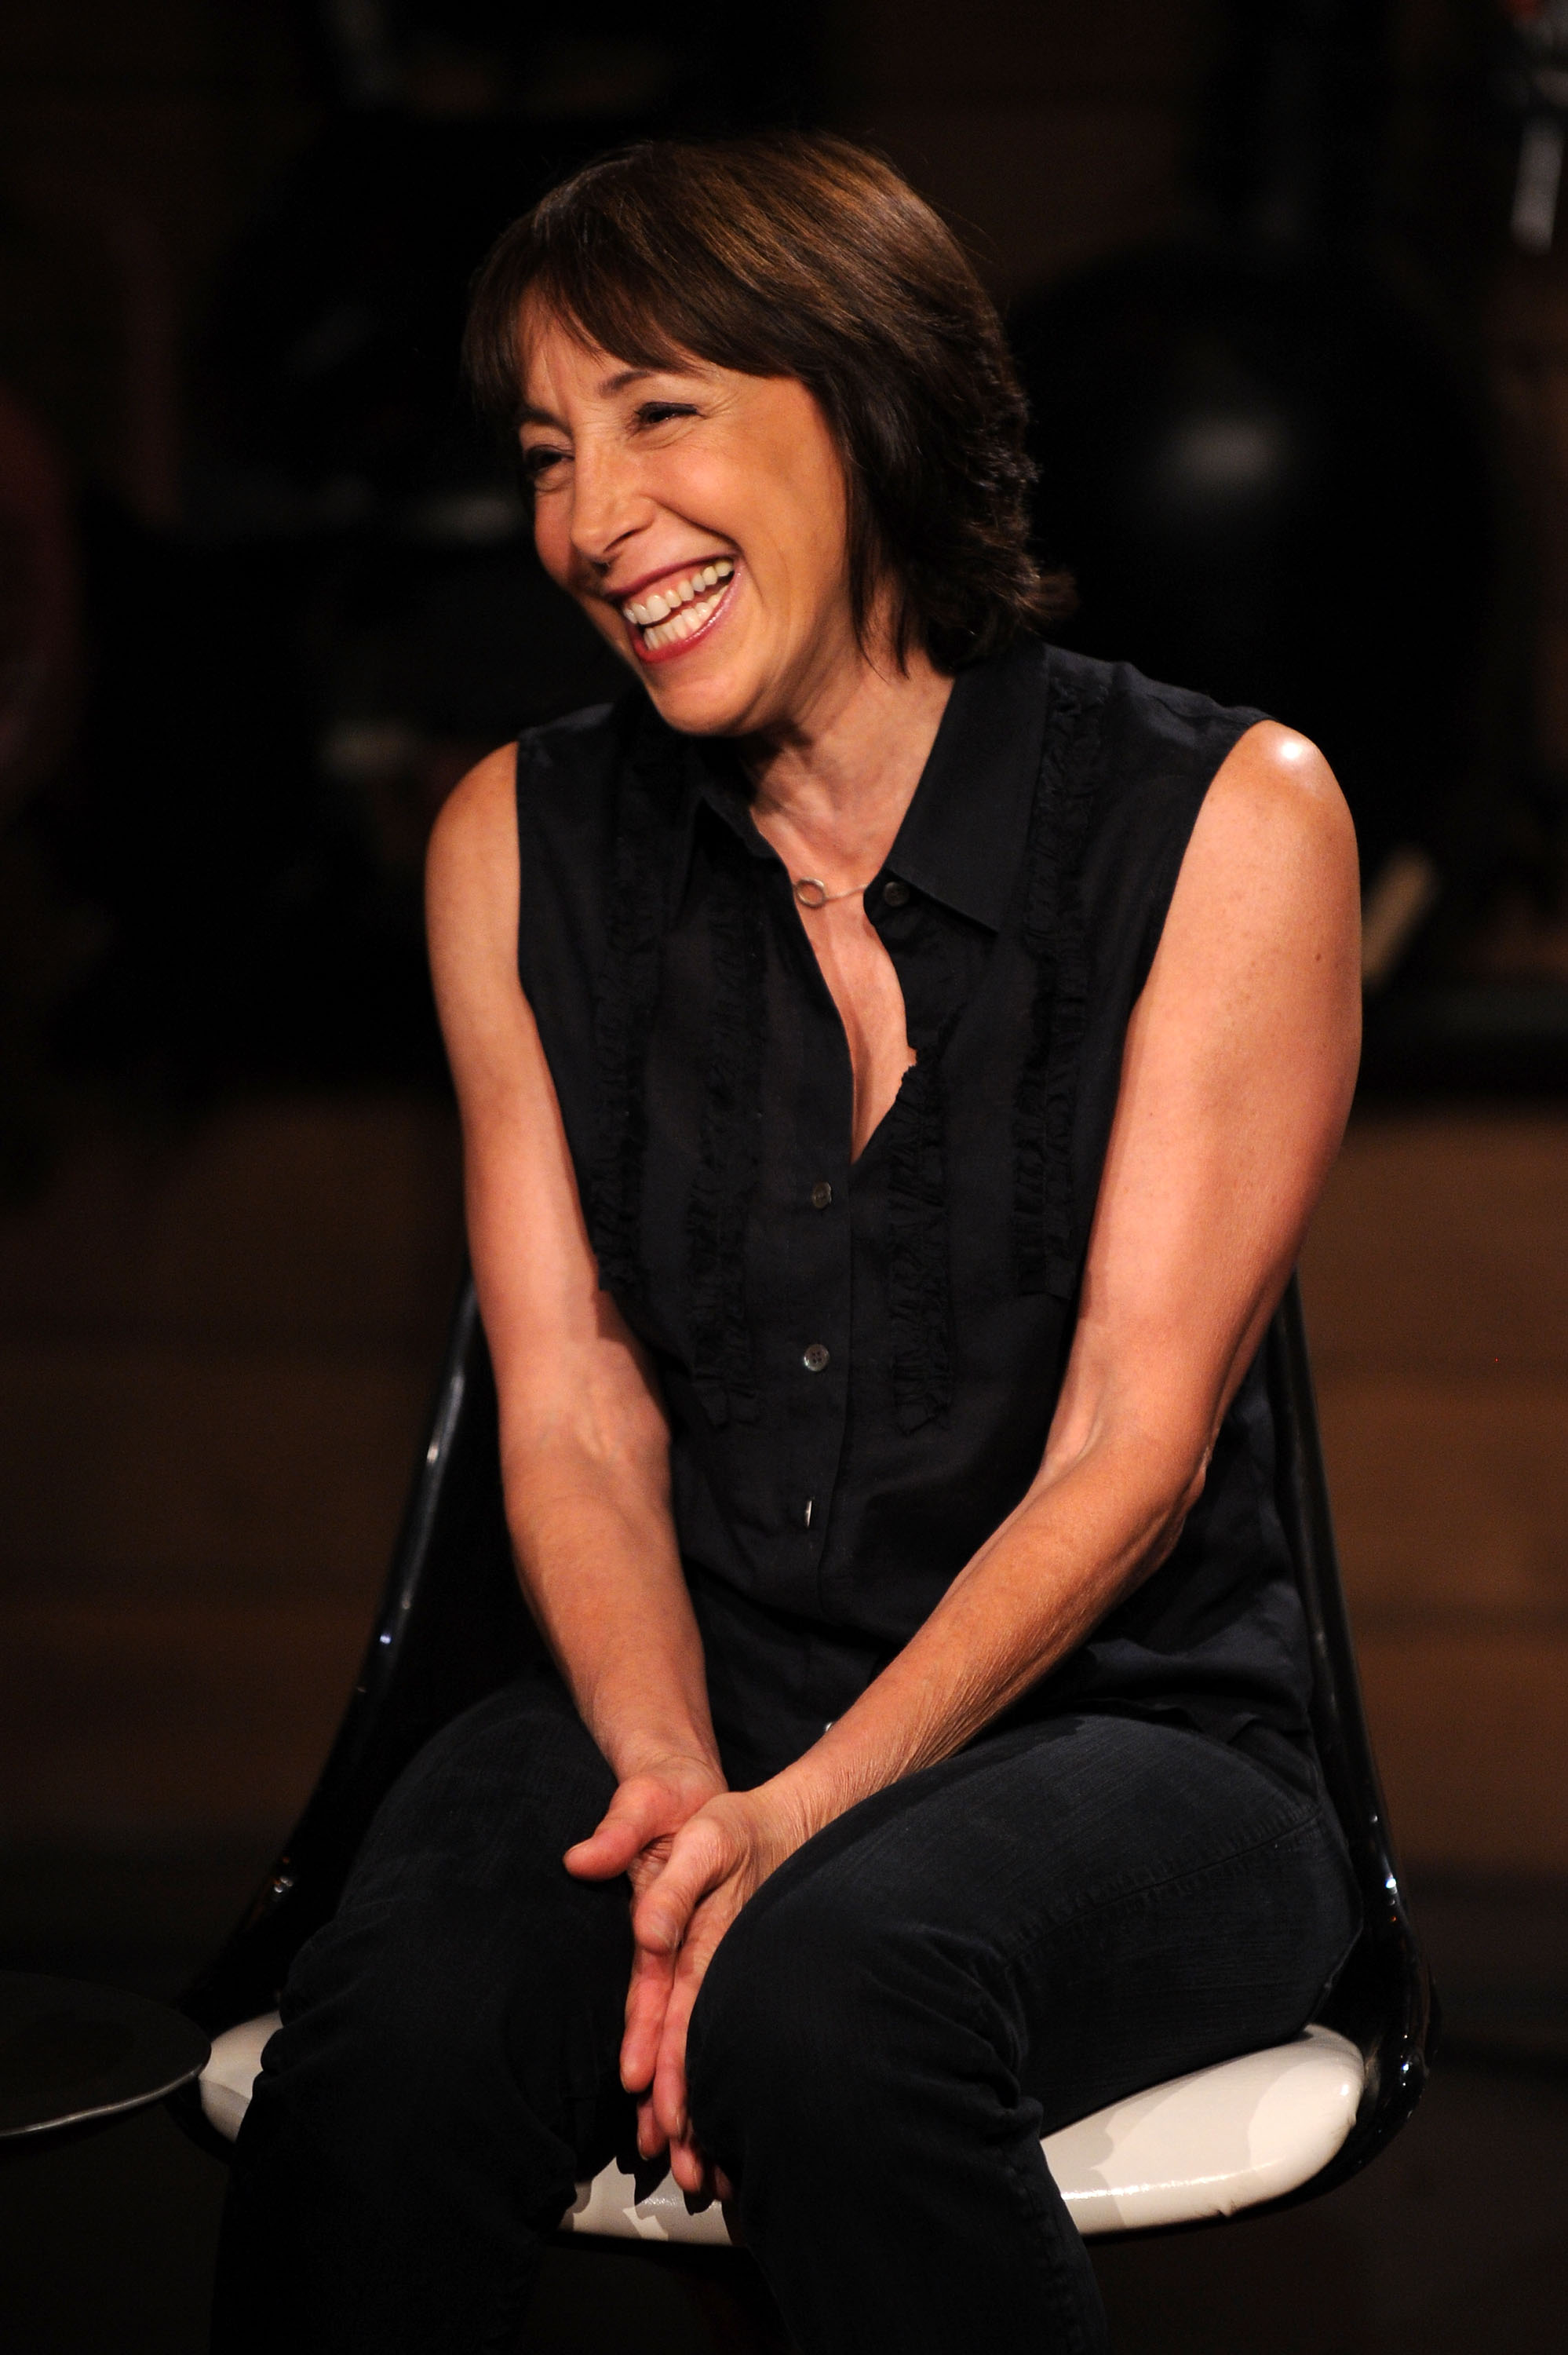 Actress Didi Conn visits "Fuse Top 20 Countdown" at Fuse Studios on July 8, 2010 in New York City. | Source: Getty Images